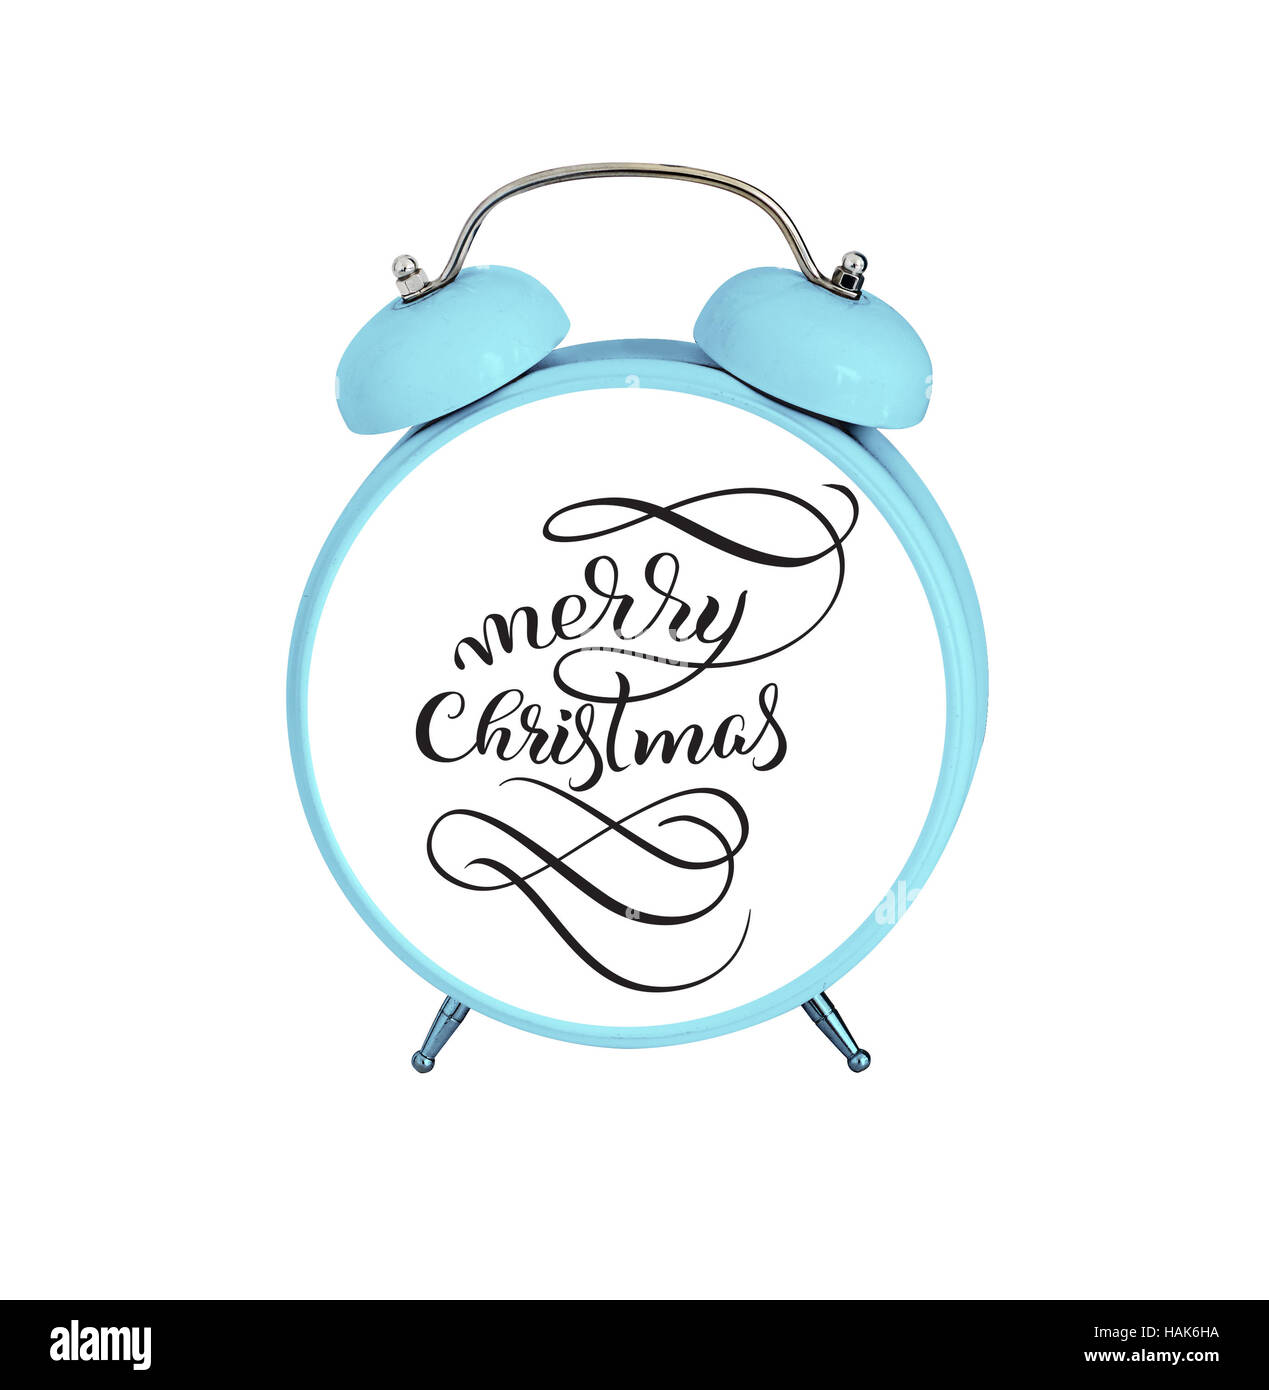 mechanical alarm clock isolated on white background and text Merry Christmas. Calligraphy lettering Stock Photo